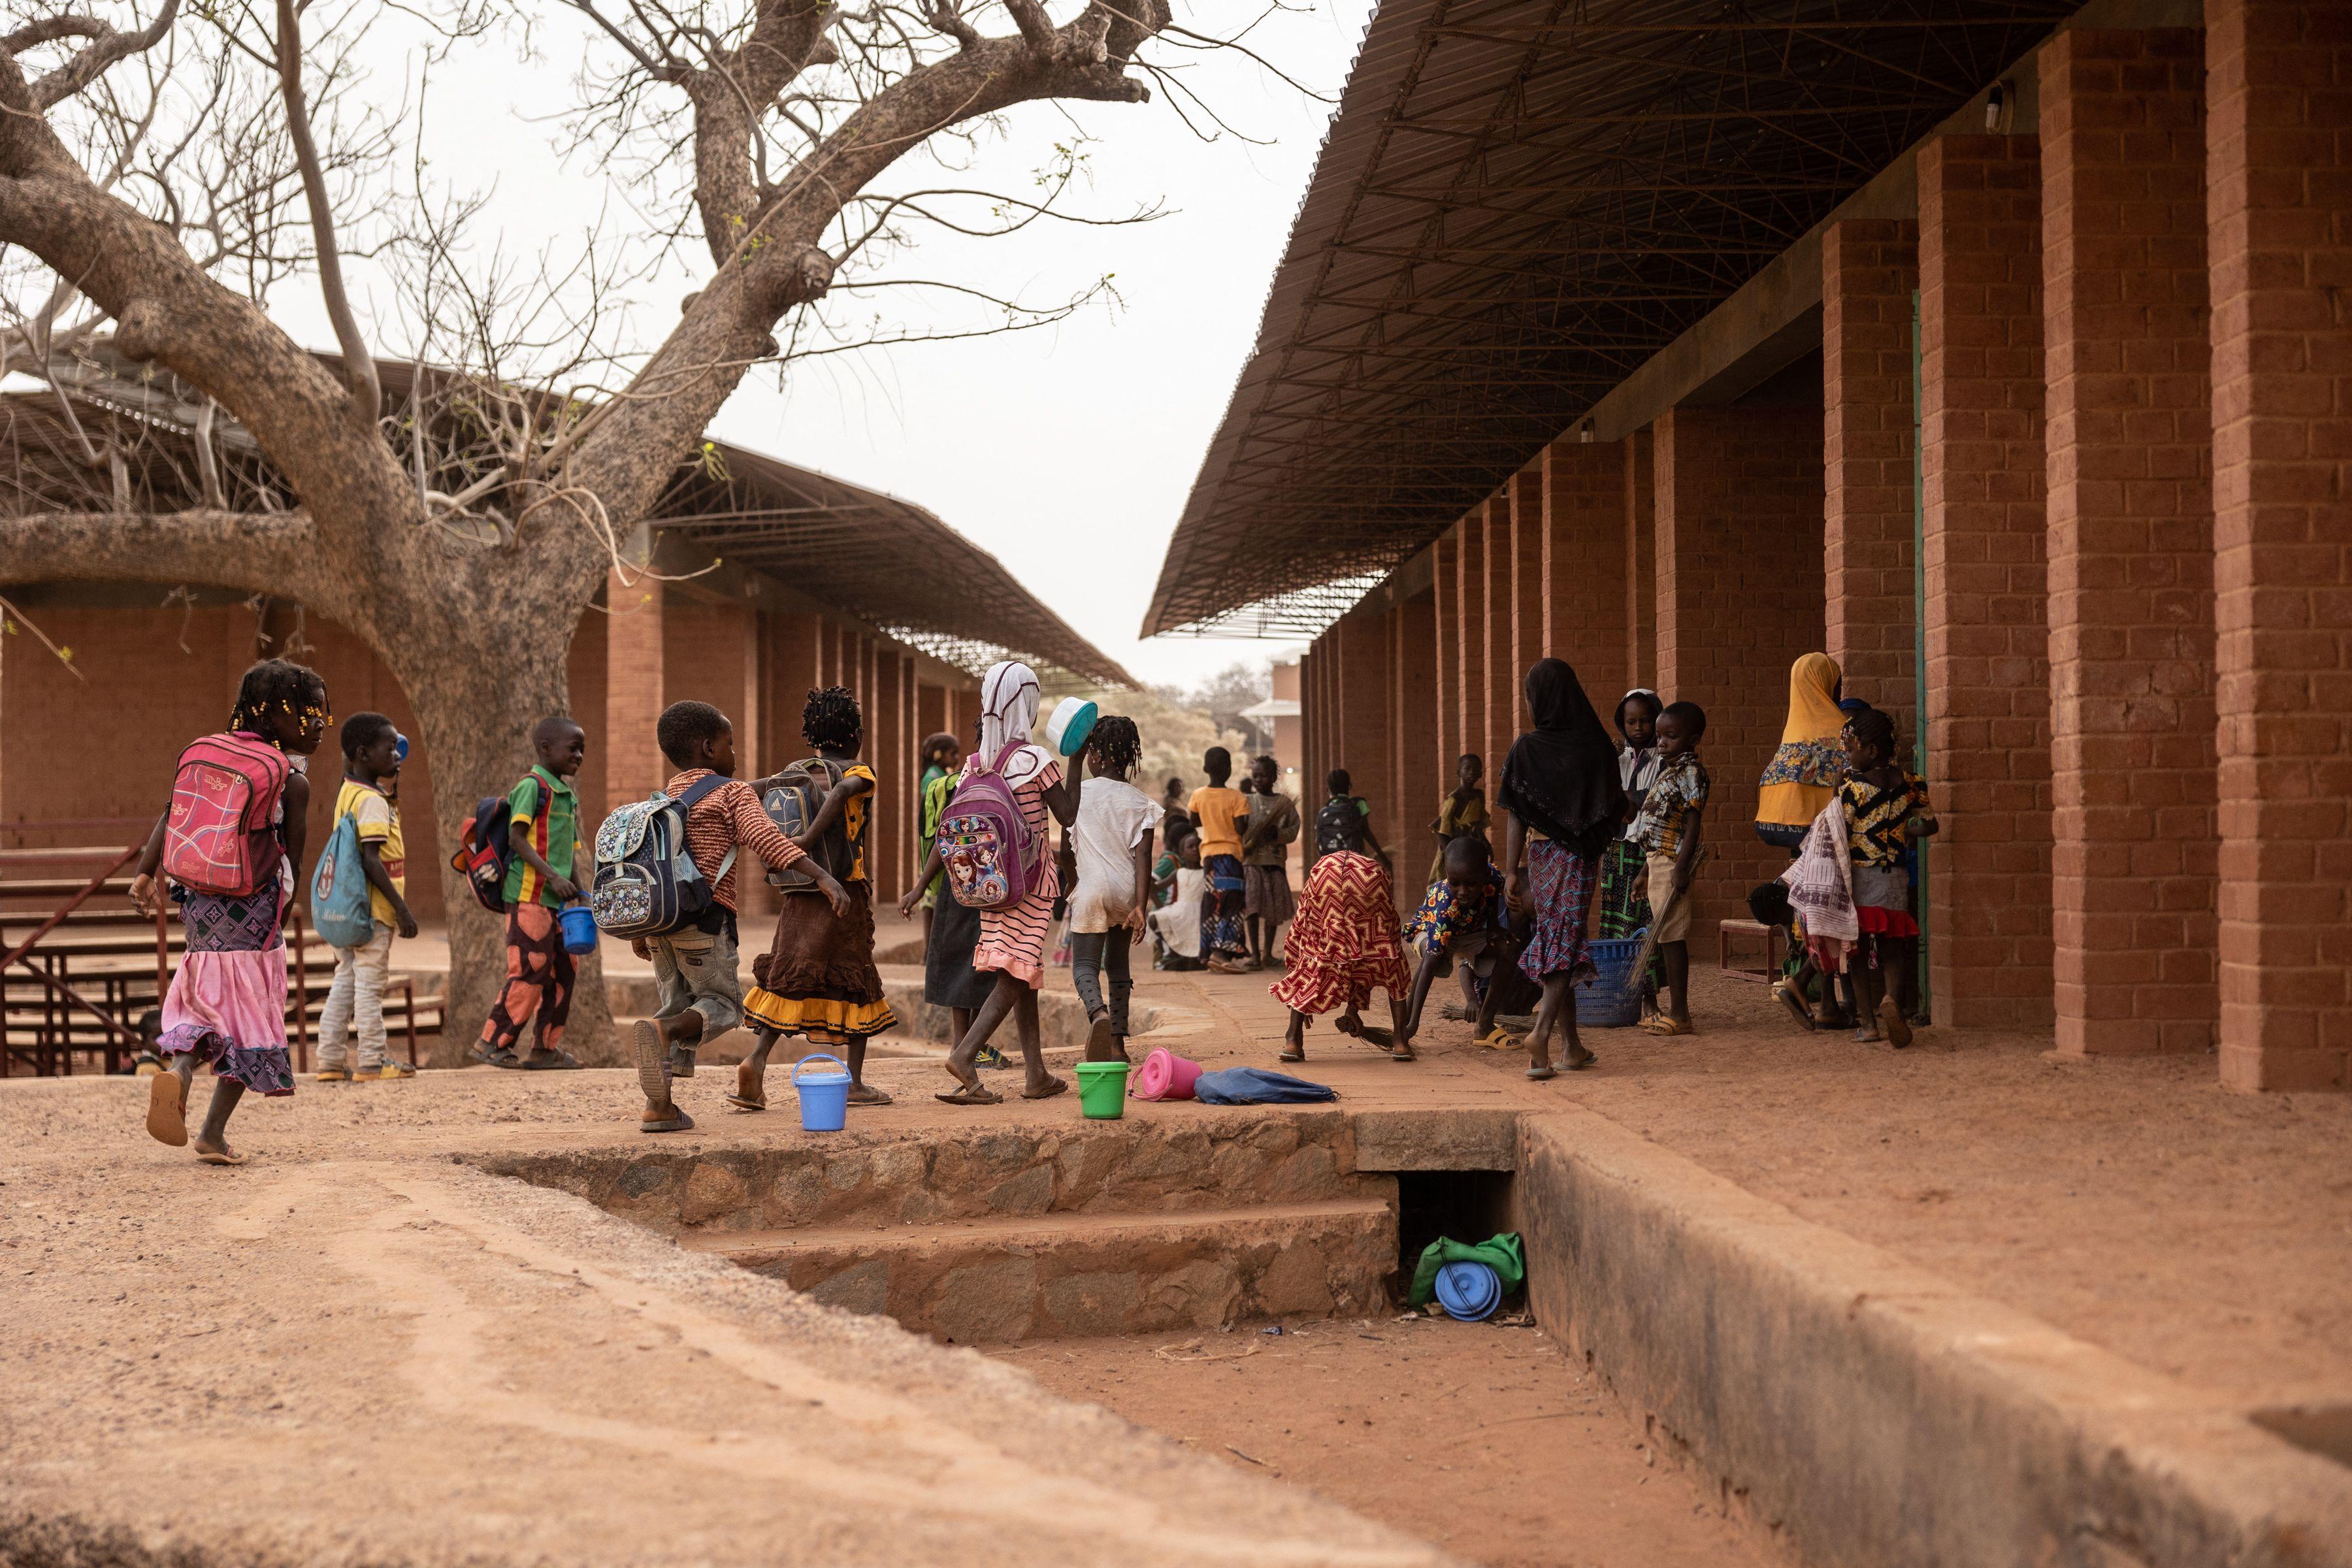 Schoolchildren play at the Village-Opera school, designed by Architect Diebedo Francis Kere, in Laongo, on March 16, 2022.